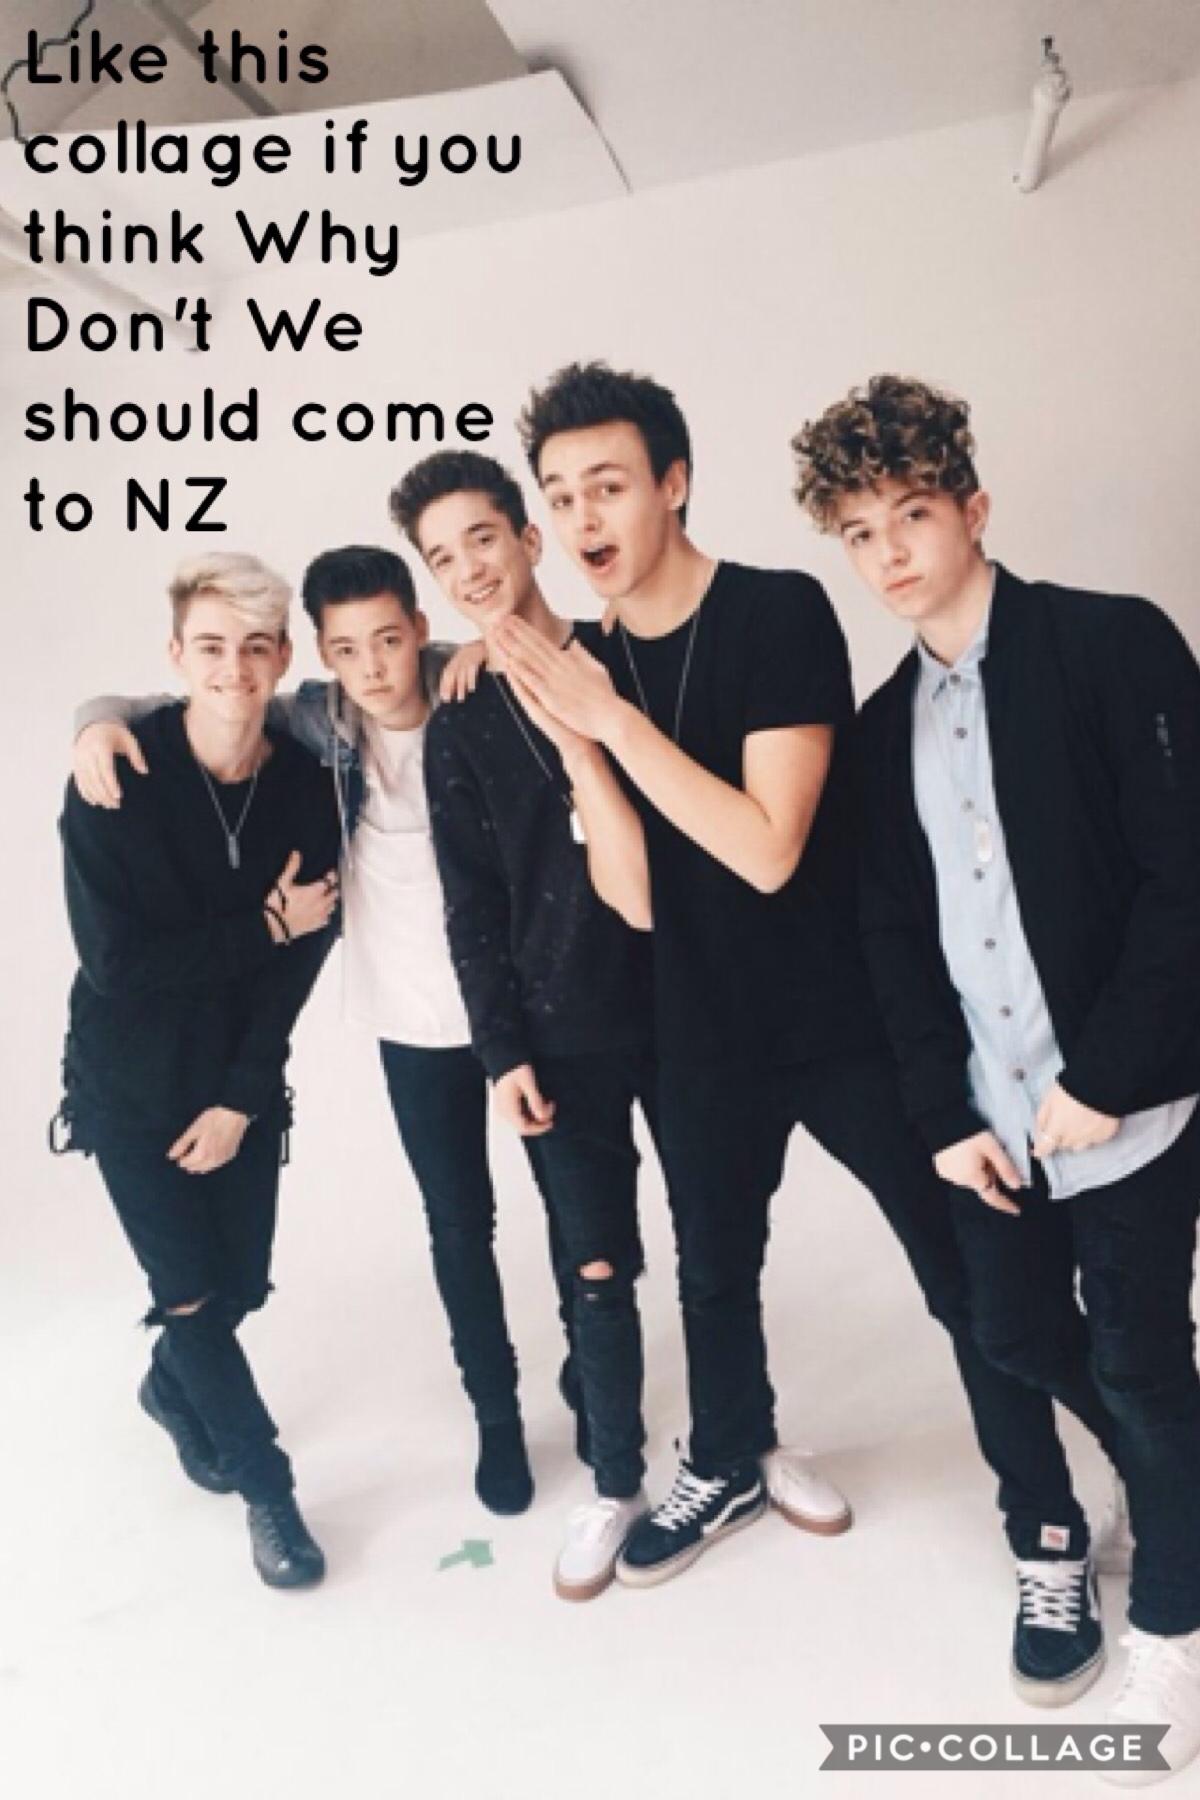 Listen to Why Don't We's songs!!